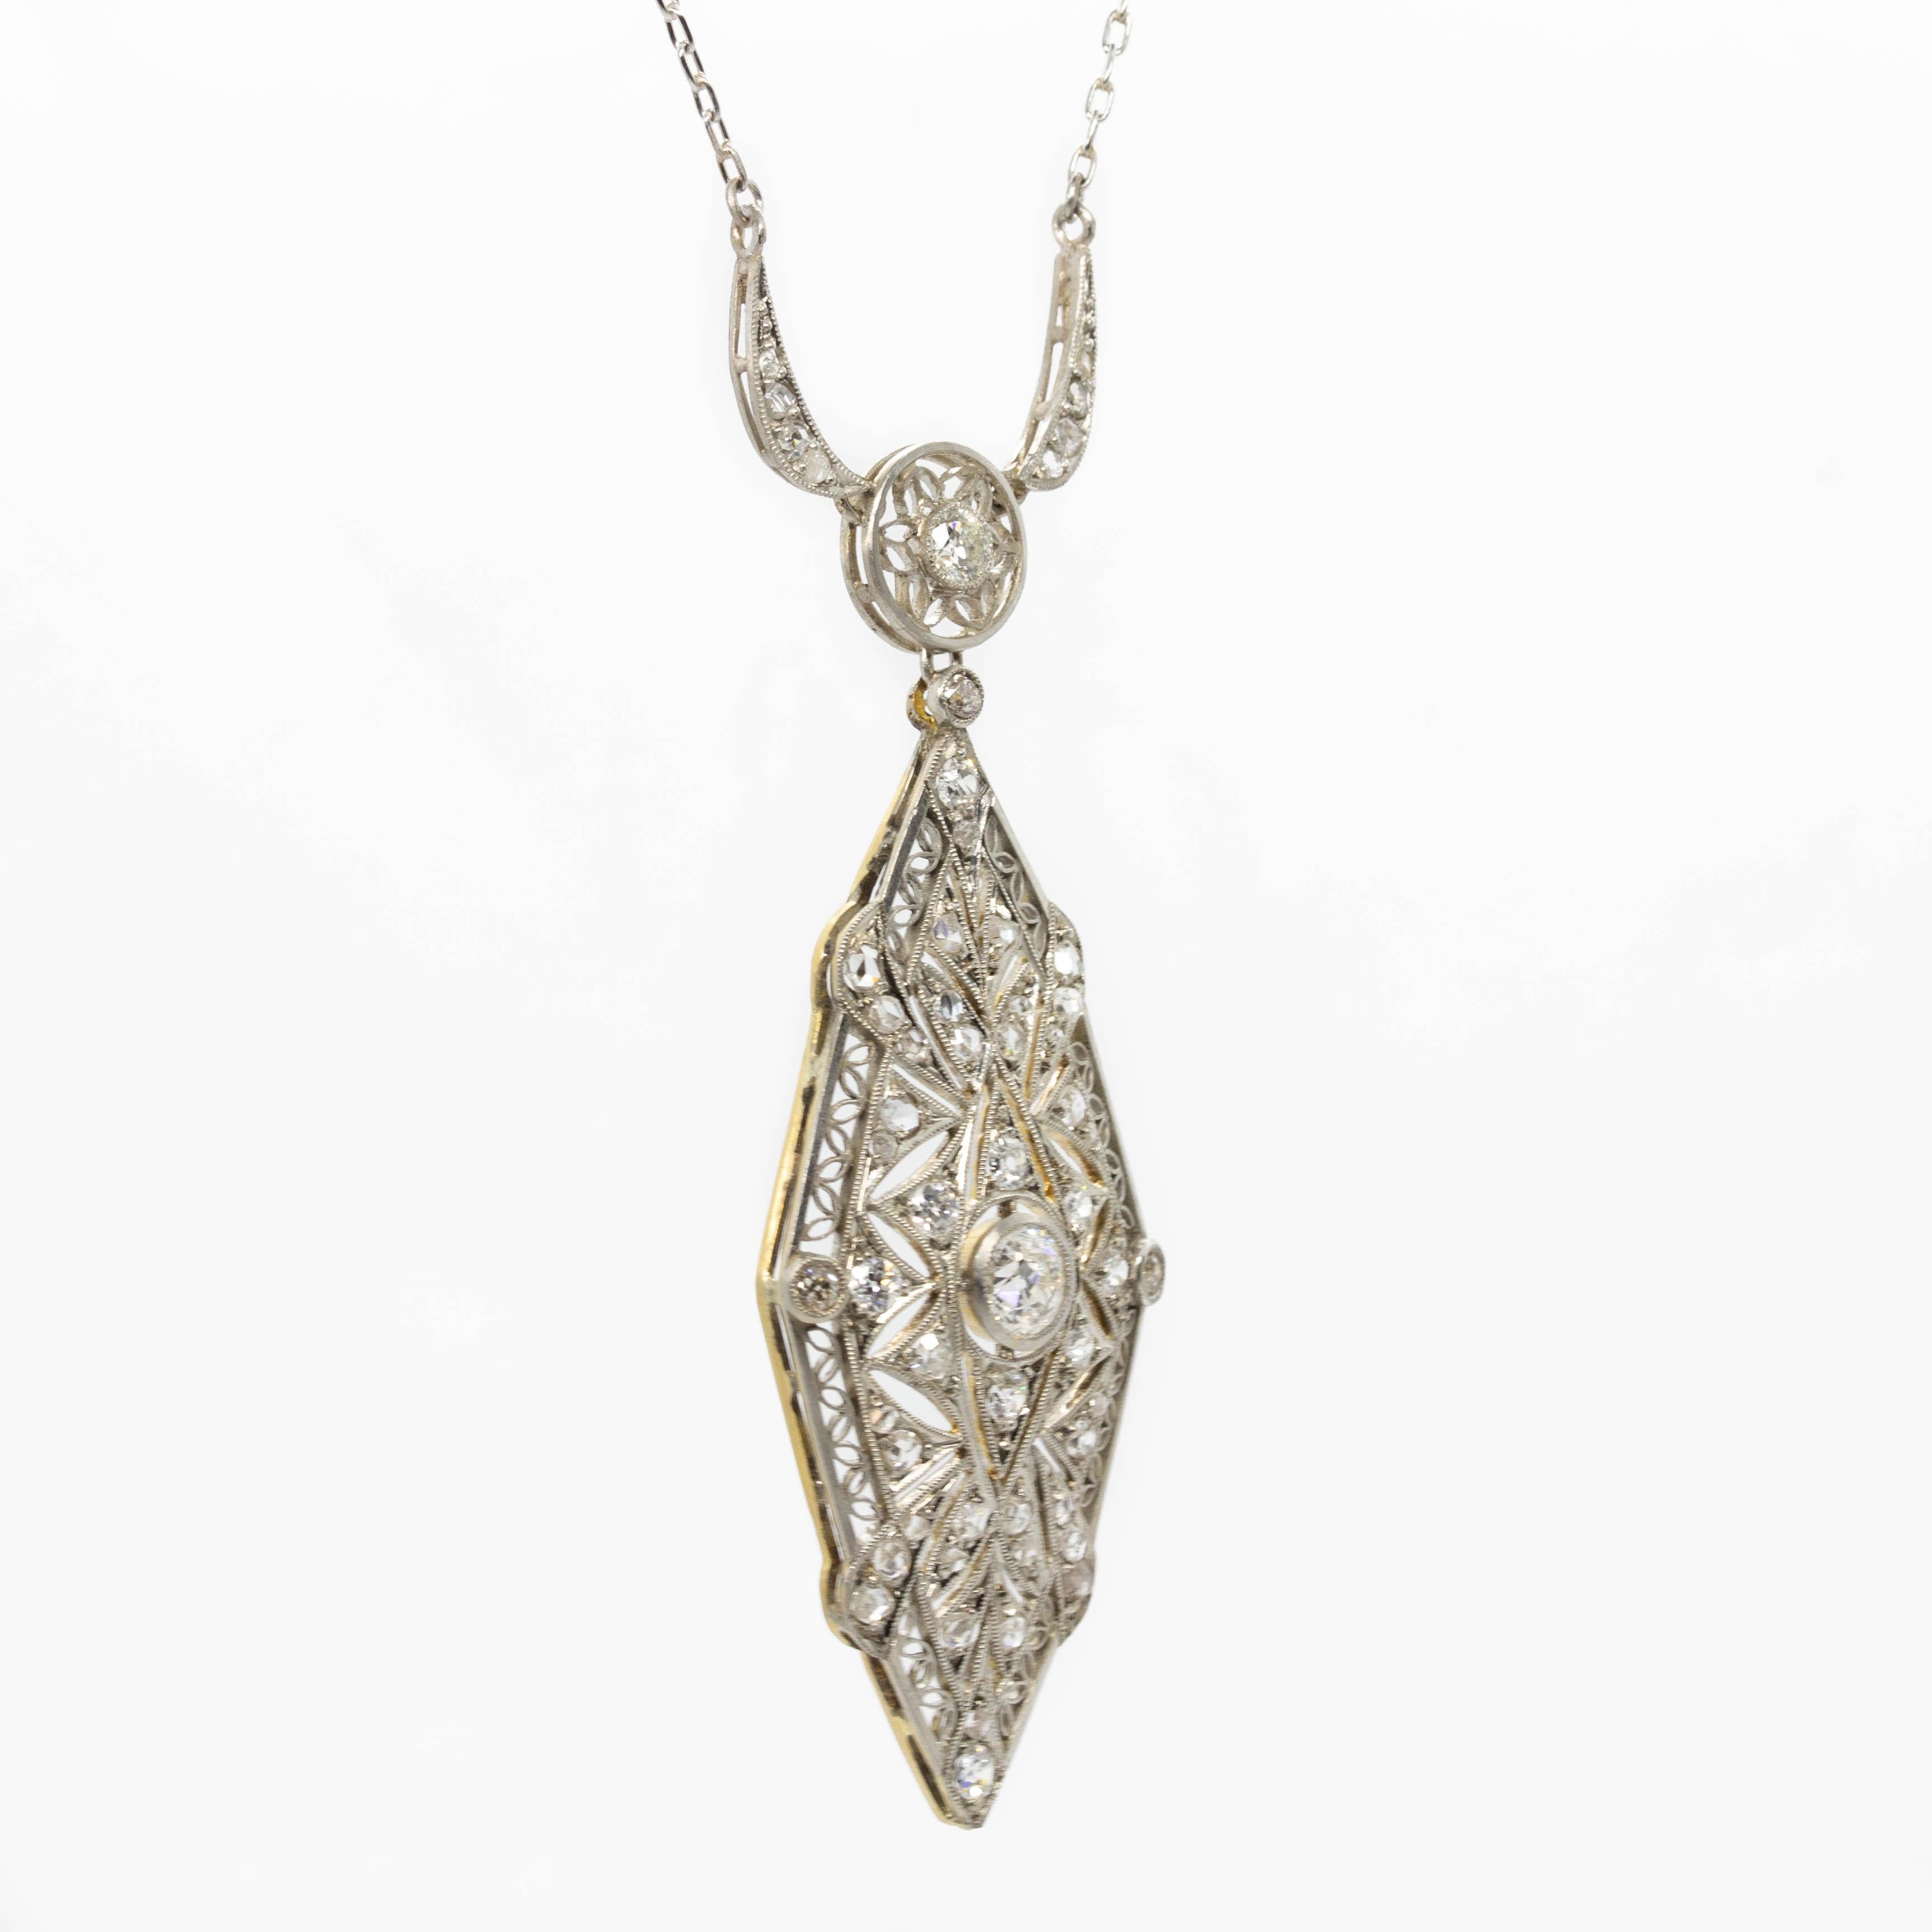 Edwardian 18 Karat Gold and Platinum Diamonds Pendant In Excellent Condition For Sale In Miami, FL